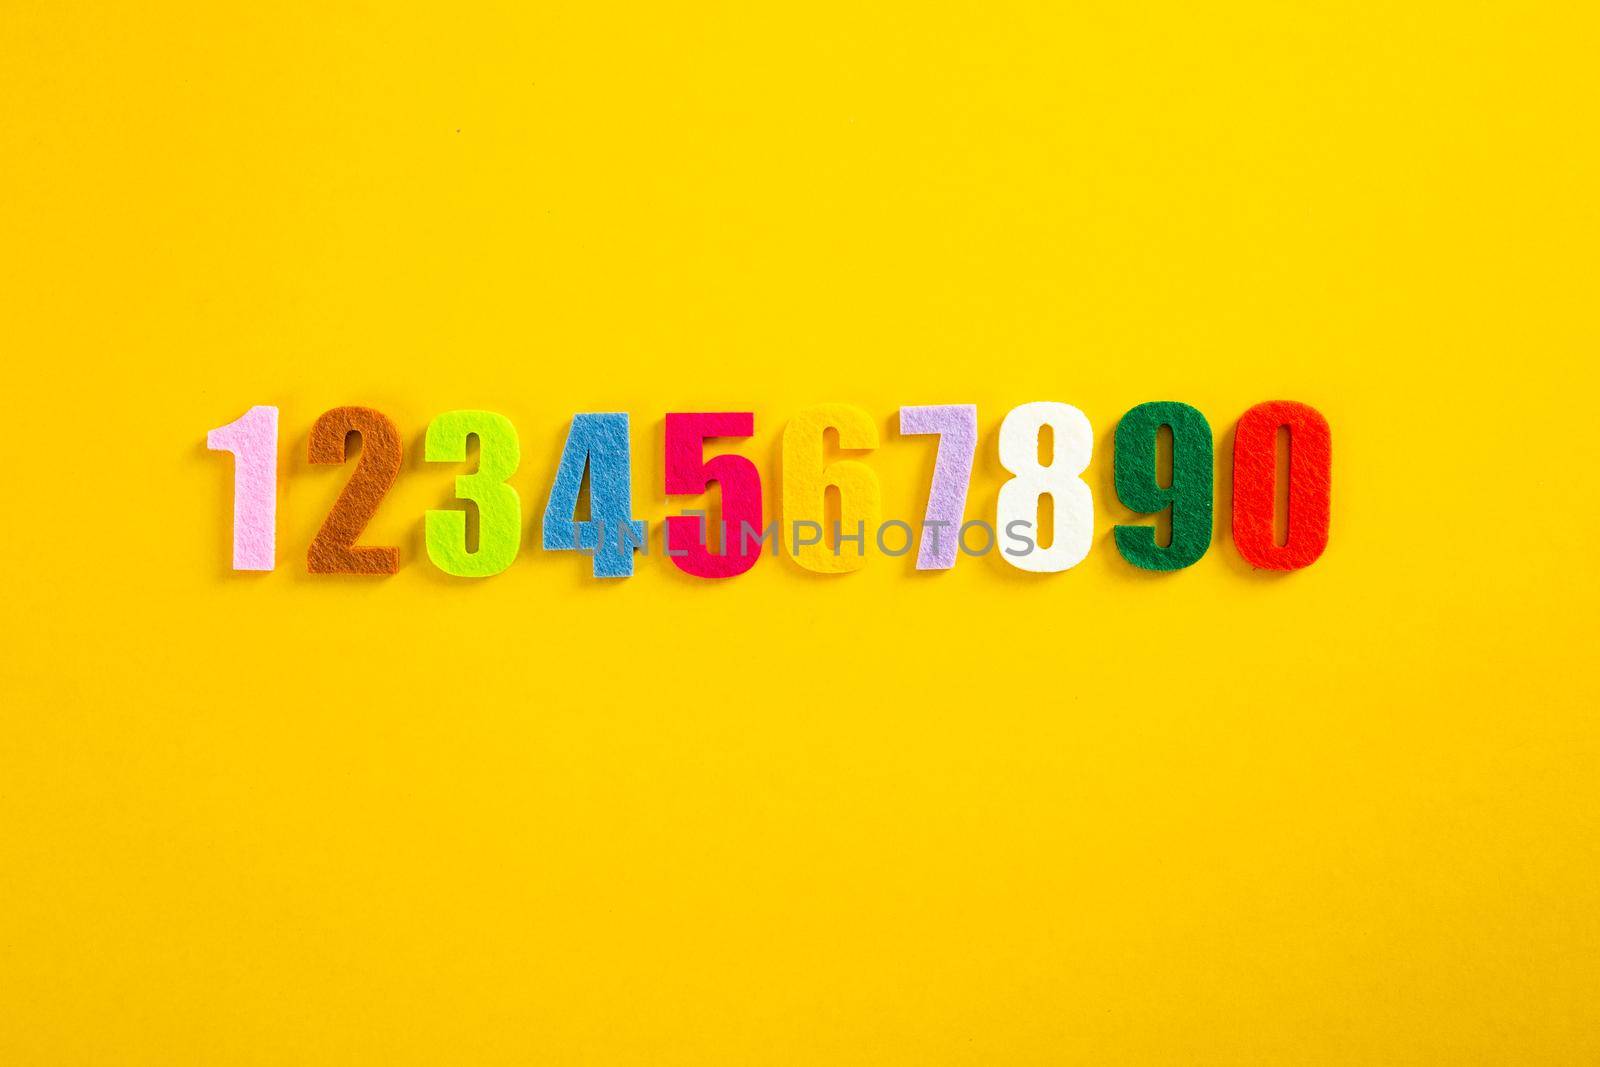 A set of colorful number on yellow background by tehcheesiong